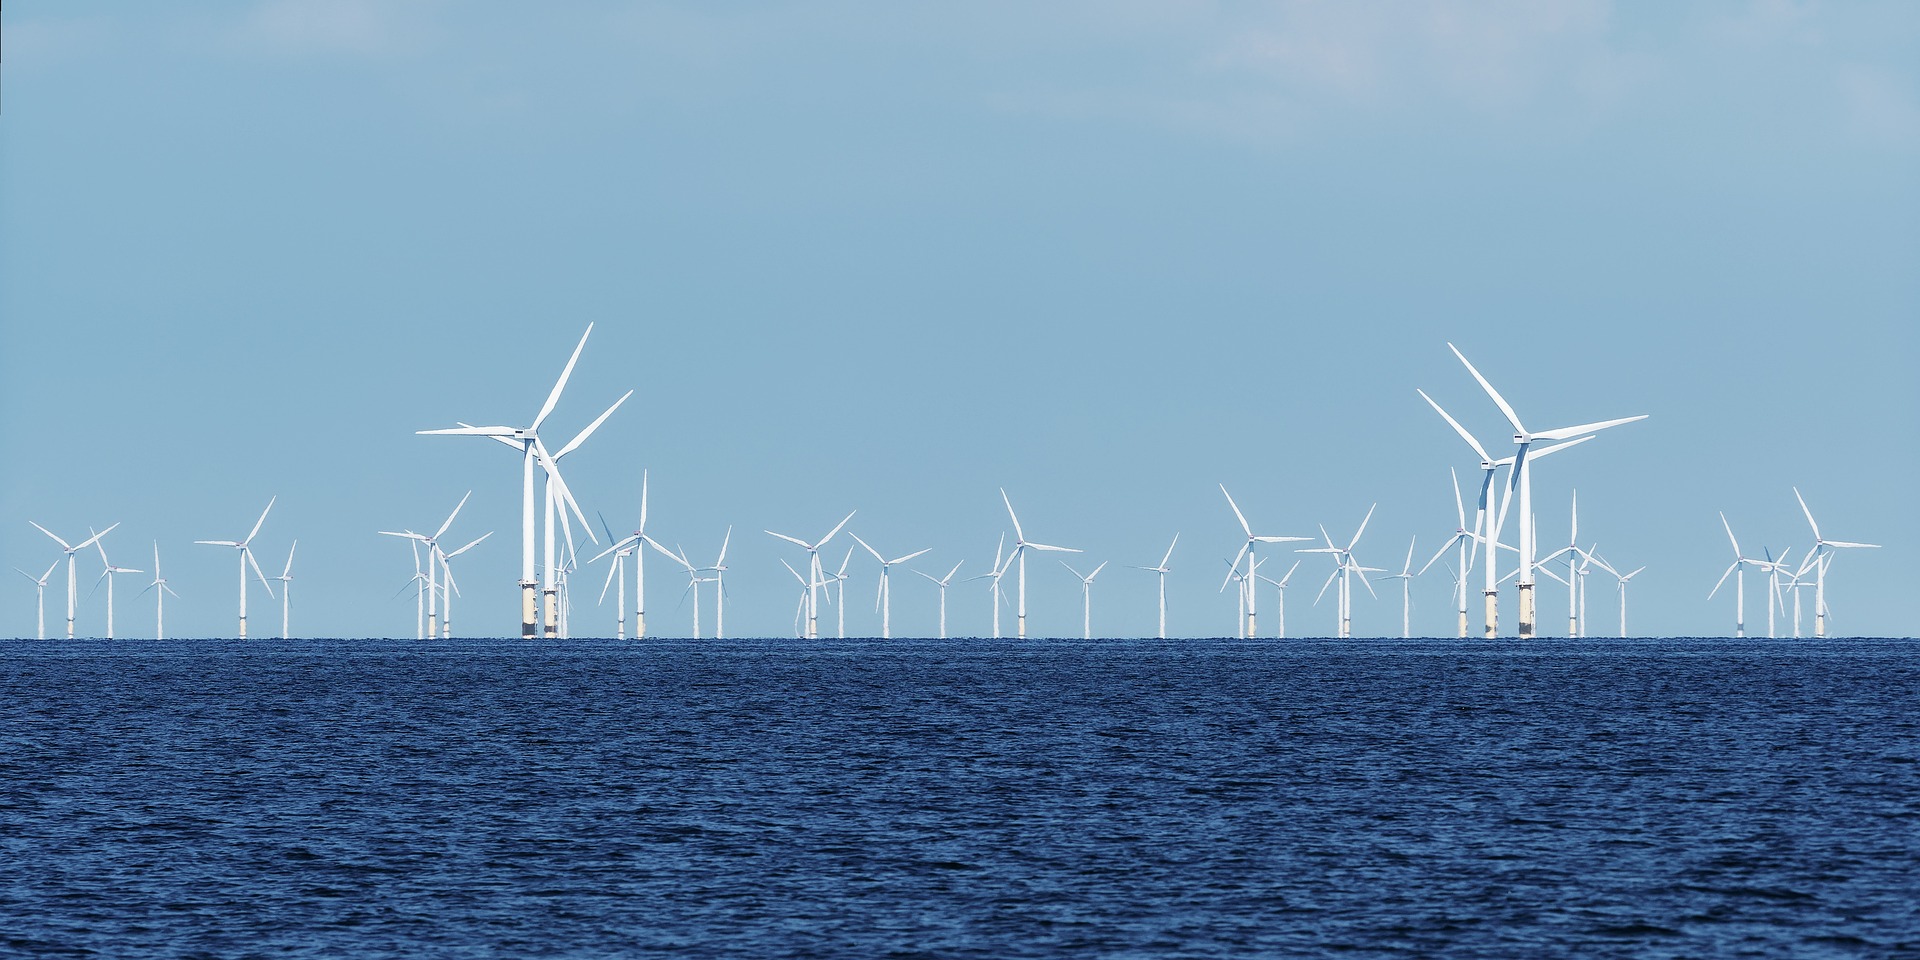 MEMBER NEWS: Miros strengthens its solution offering for offshore wind